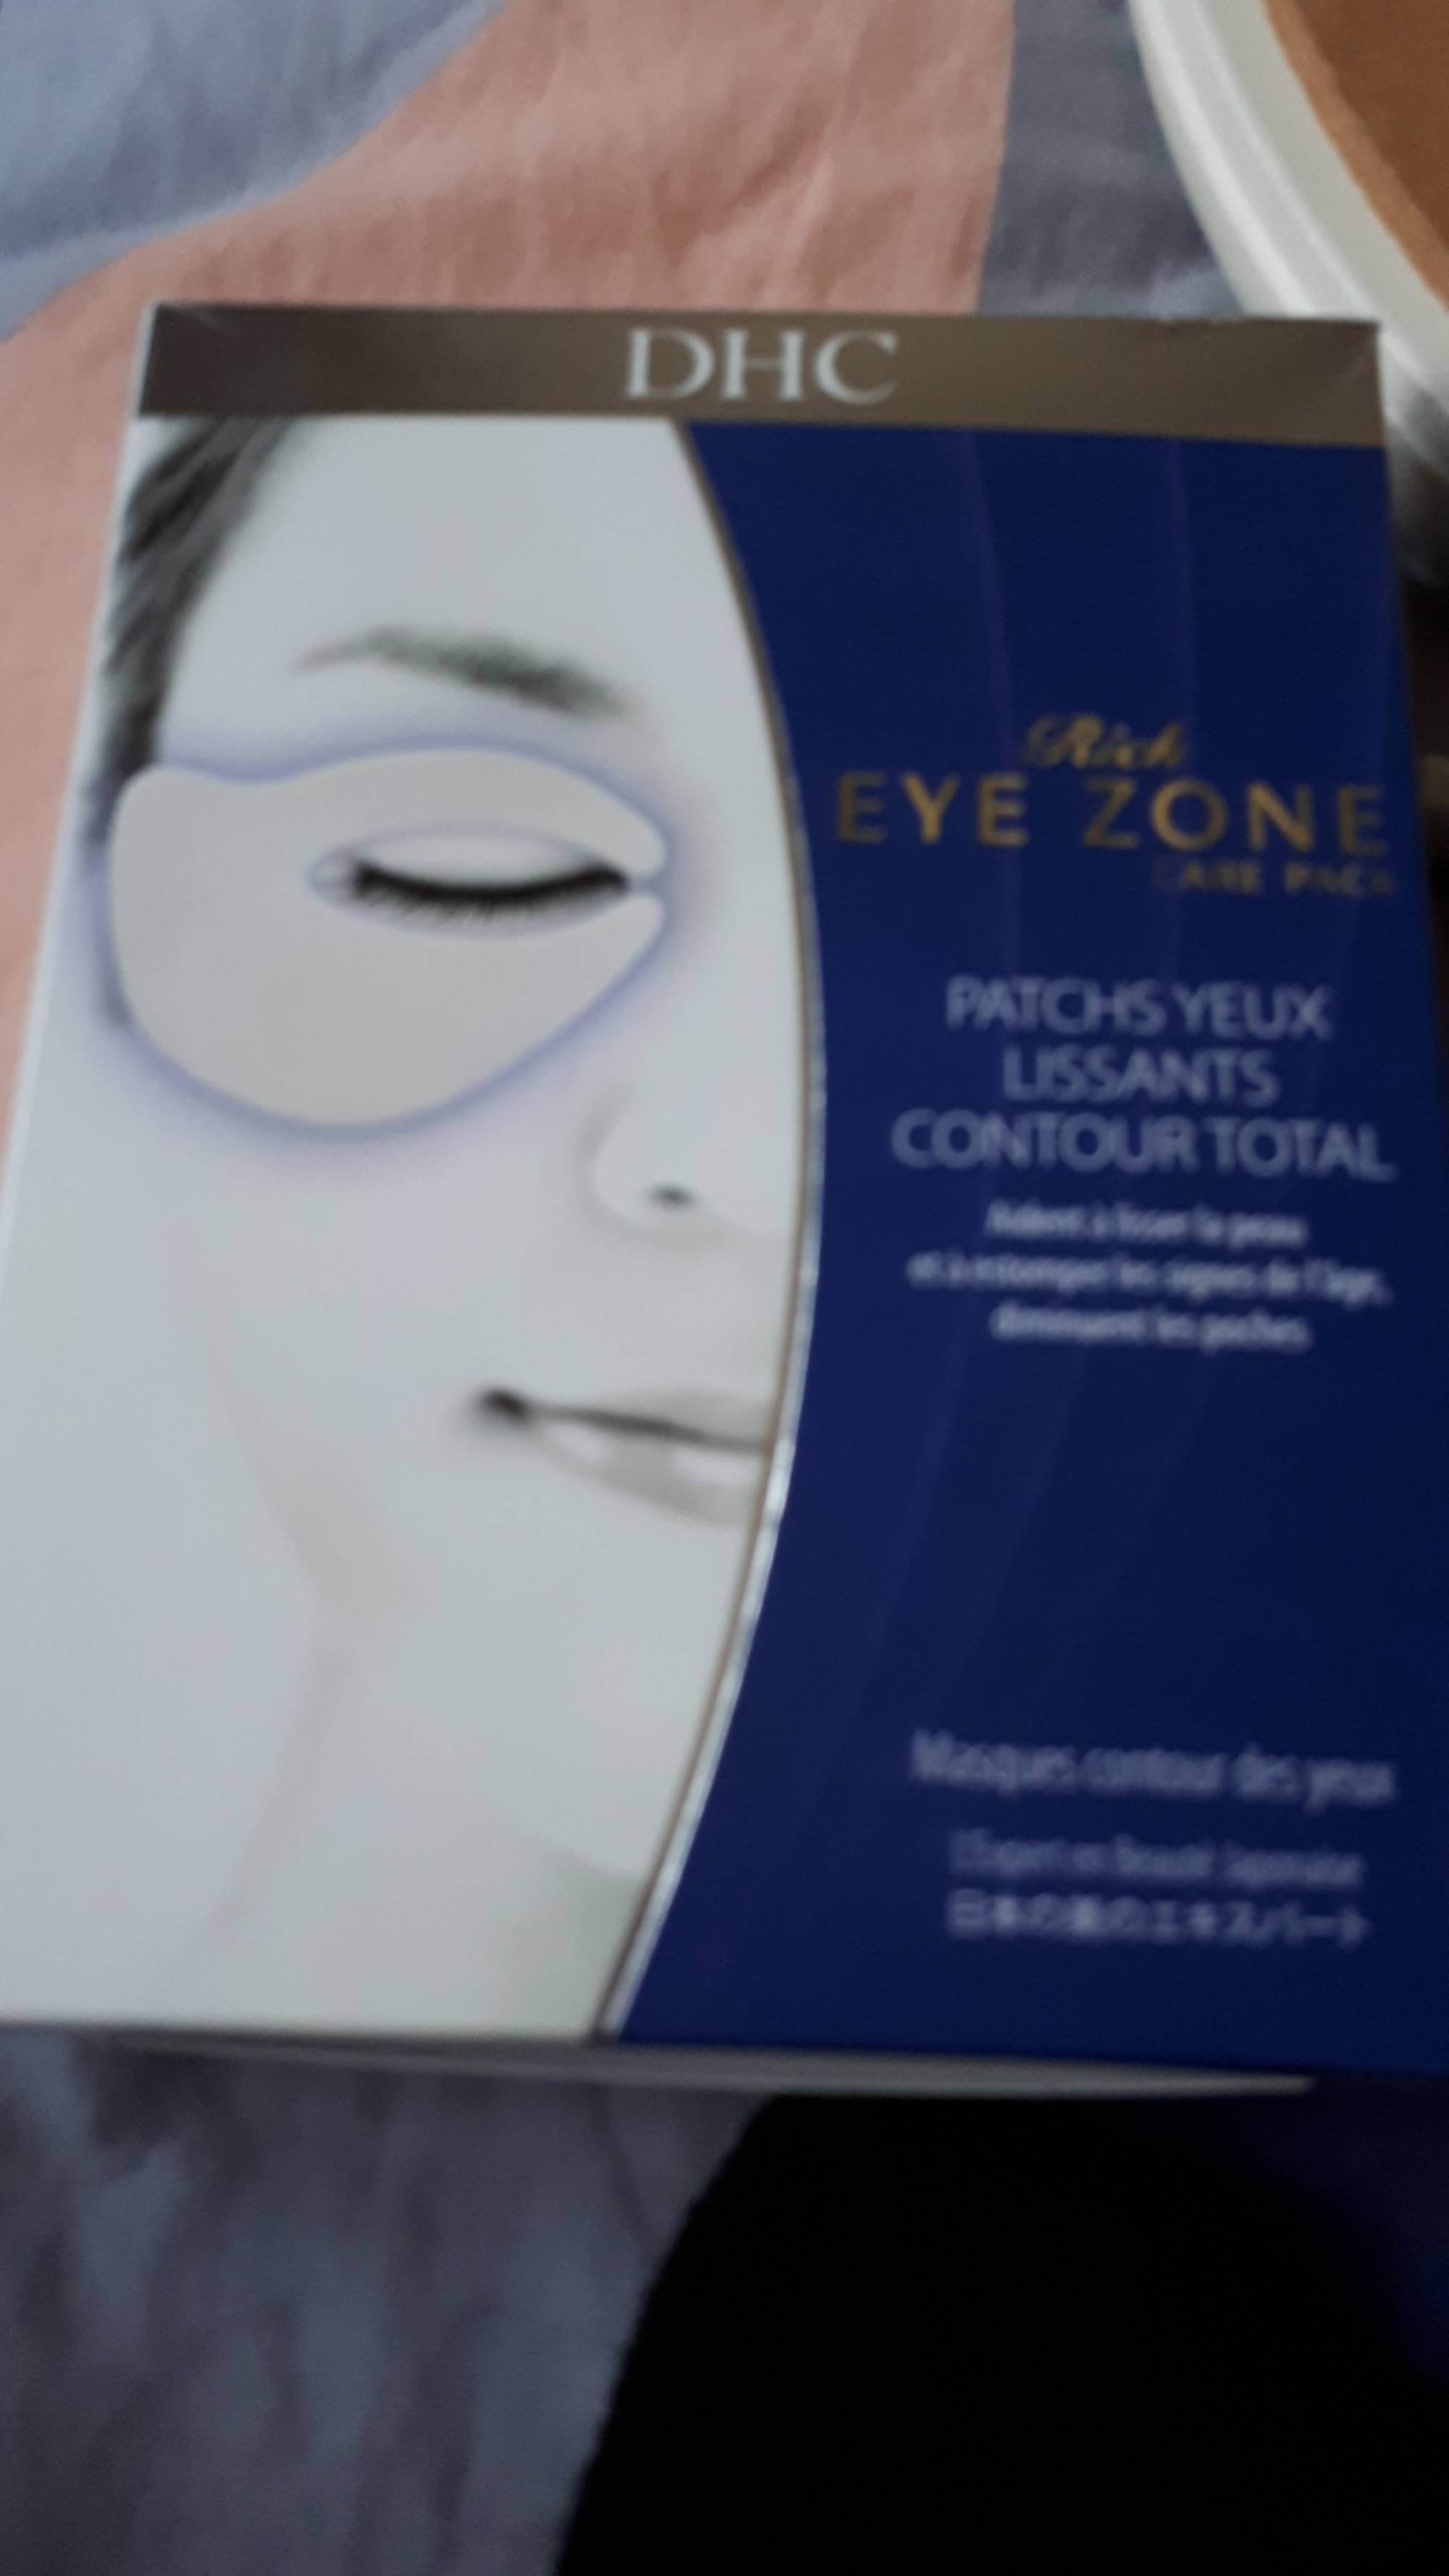 DHC - Rich eye zone - Patchs yeux lissants